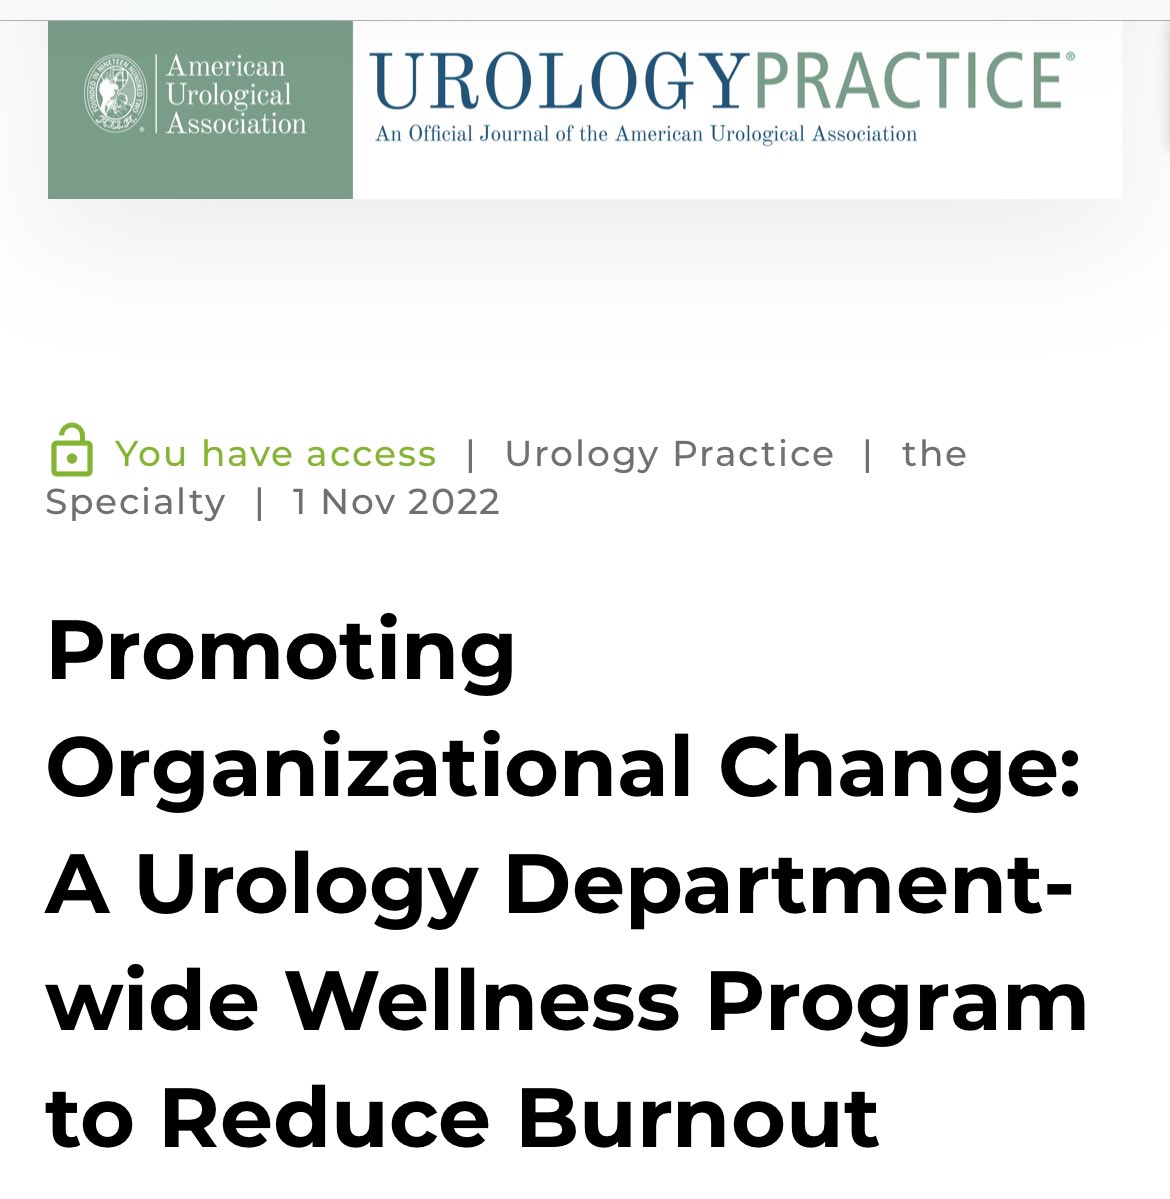 Excited to see this published in @UrologyPractice: our #wellness program and survival strategy during #COVID. Great job @EzraMargolin and @ChicoKosber! #leadership @JamesJmm23 @CBAnderson2014 @SmigsM auajournals.org/eprint/VDEHKIK…